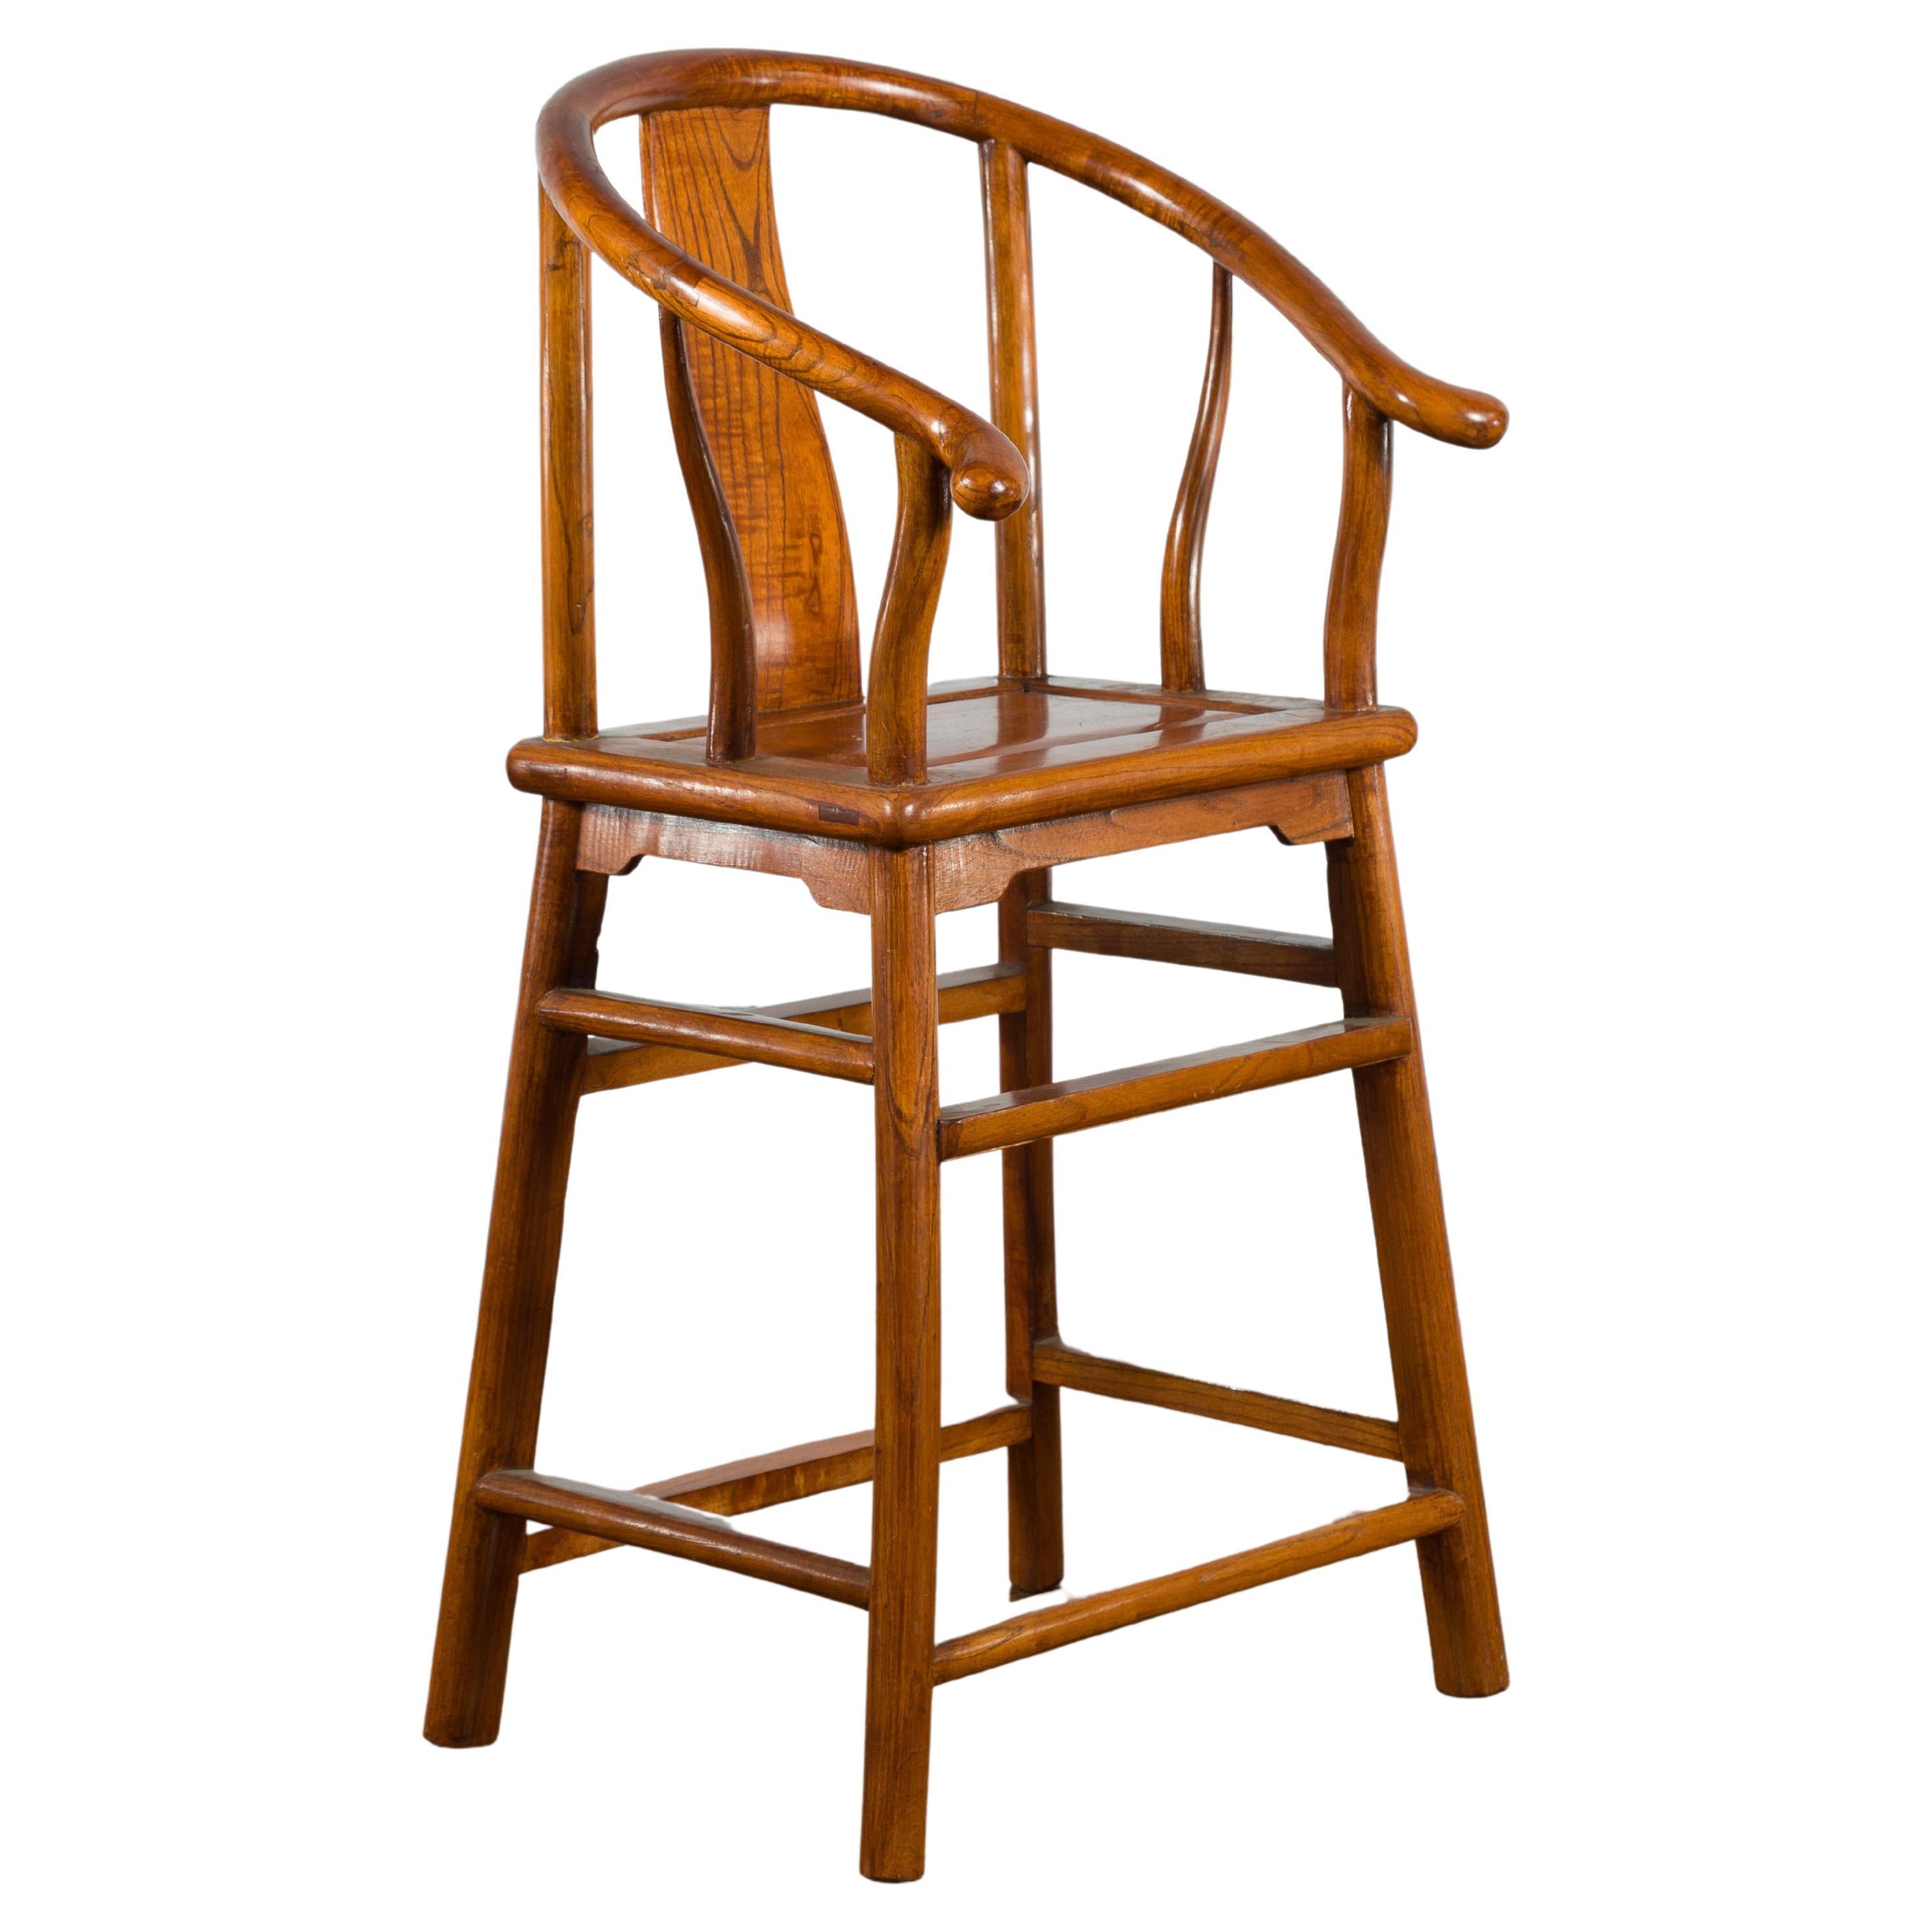 A small vintage elmwood Chinese horseshoe back chair from the mid 20th century, with side stretchers. Created in China during the midcentury period, this small chair features a horseshoe back with curving splat, resting upon a rectangular seat with